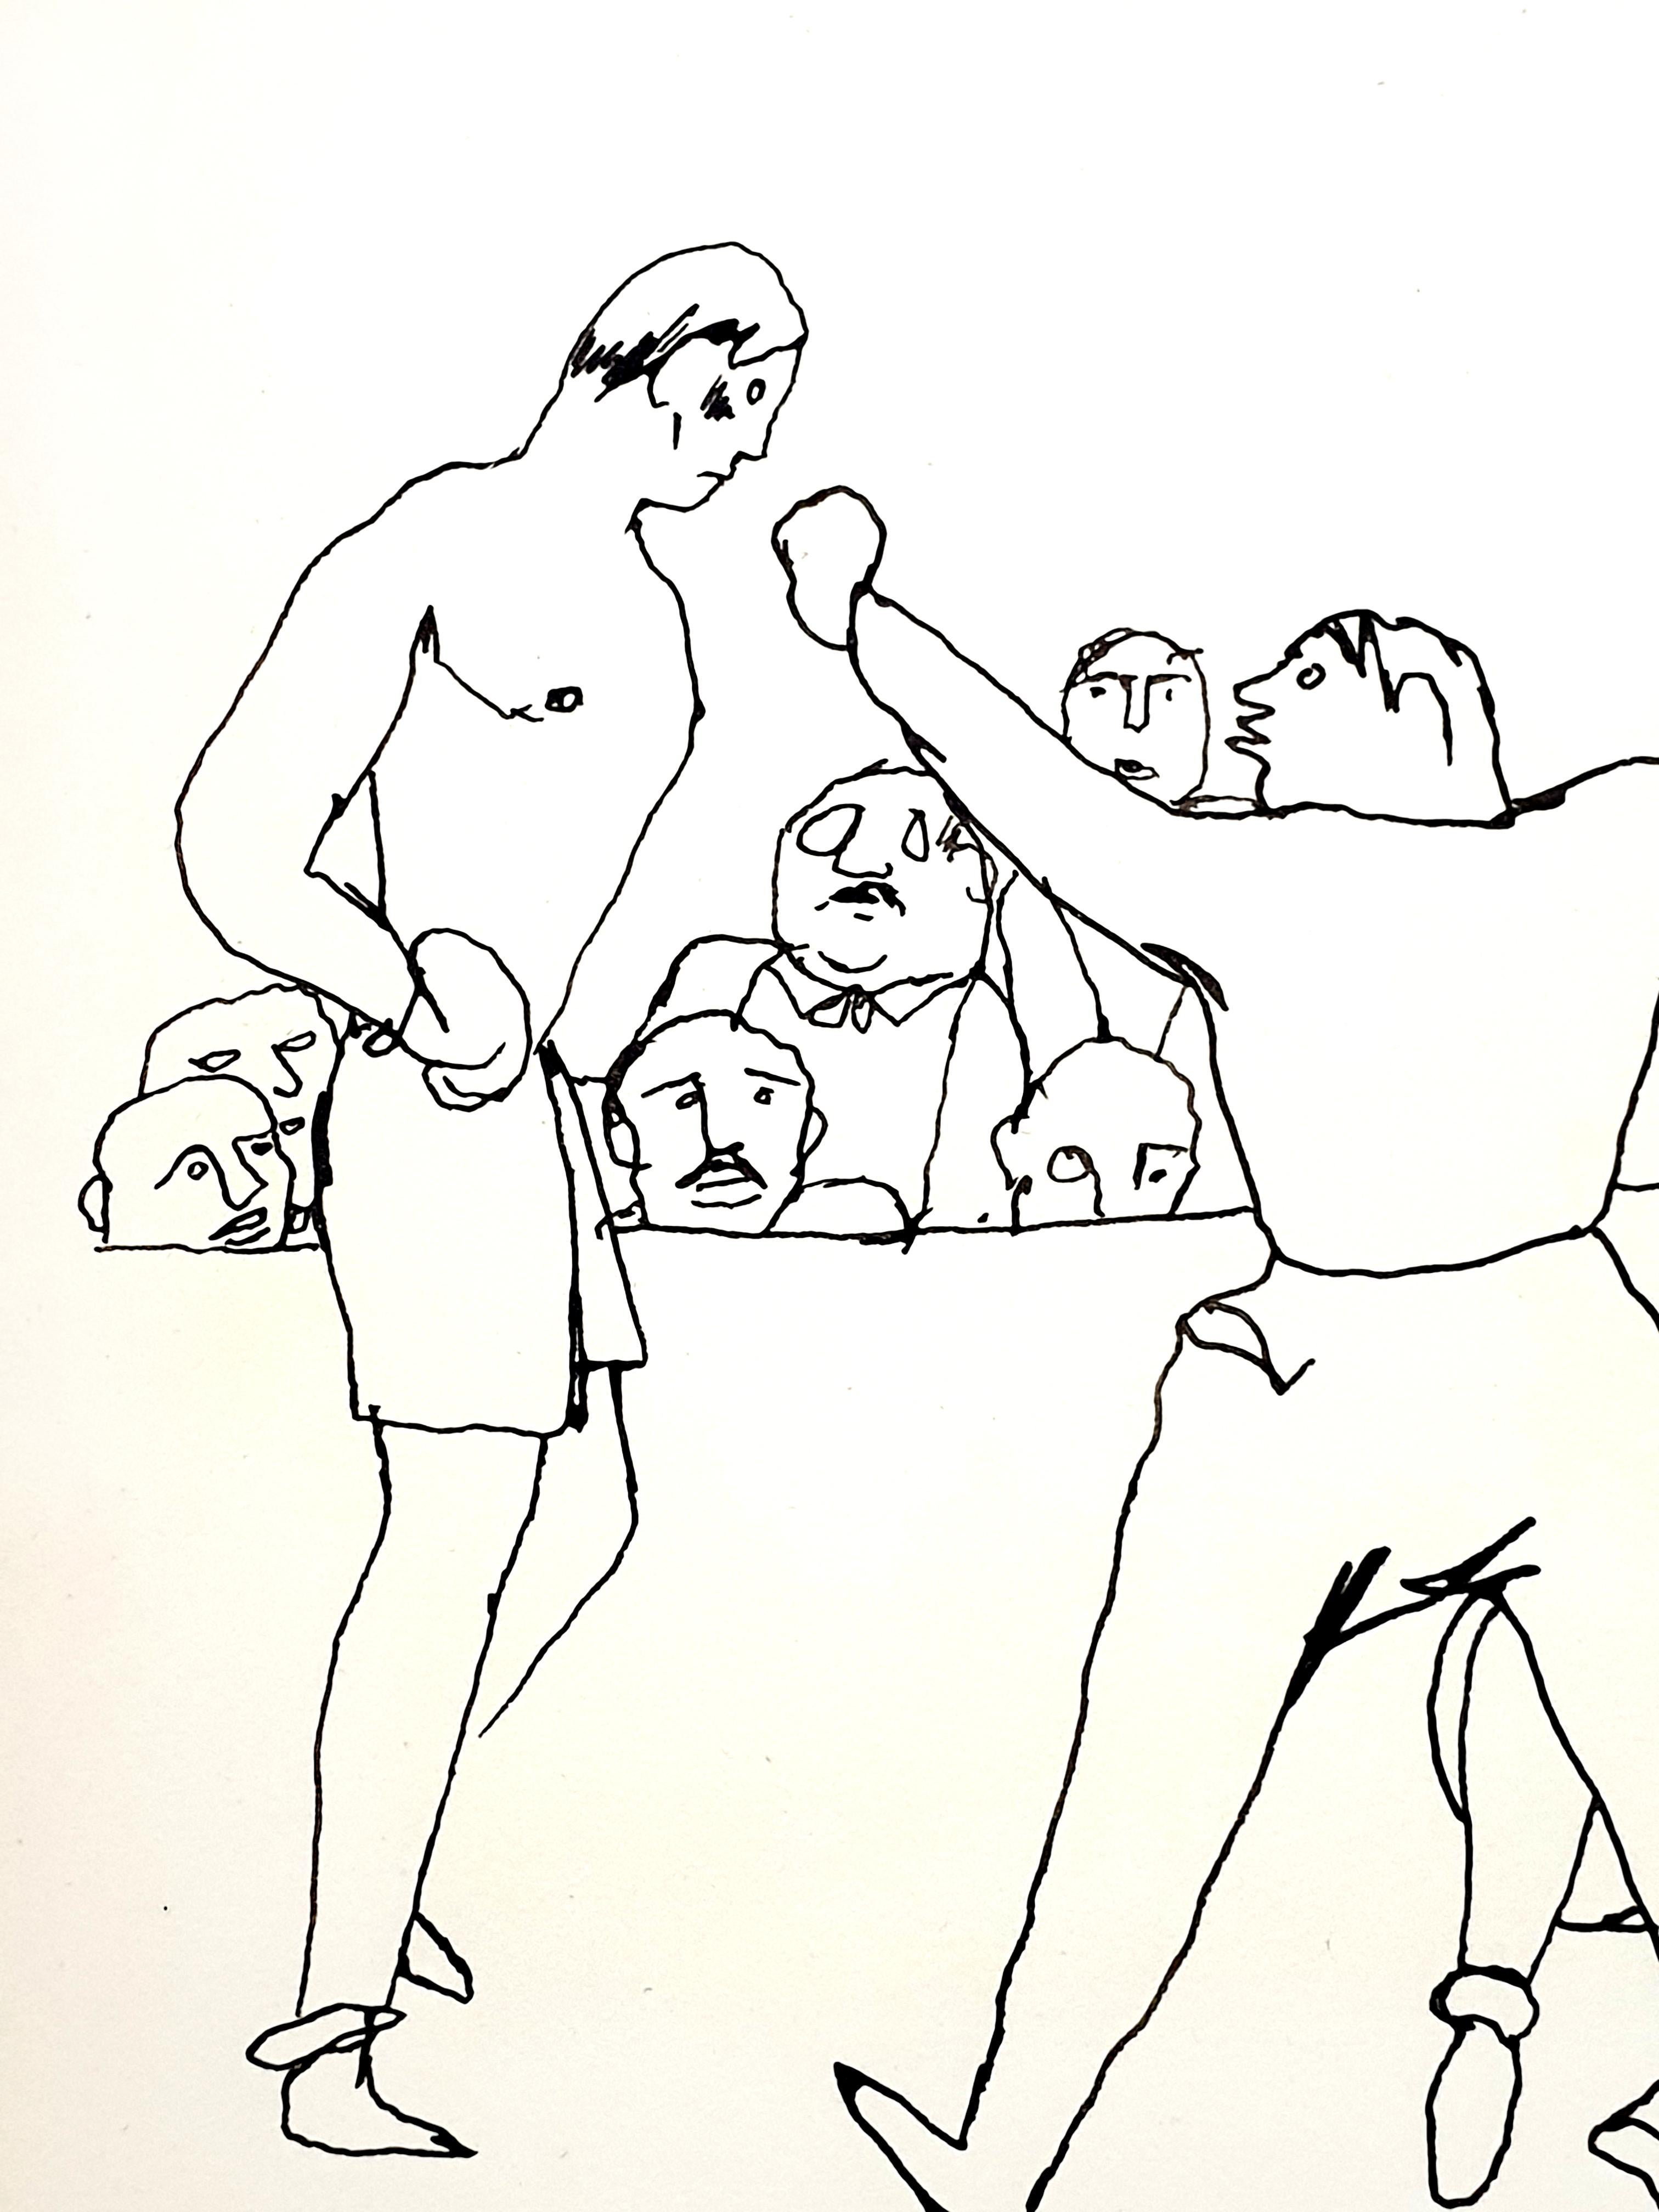 Jean Cocteau - The Fight - Original Signed Drawing
1923
28 x 22 cm
Signed

This drawing was made as a frontispiece of the book Dessins published in 1923.
Additional expertise from Annie Guedras can be facilitated if requested.